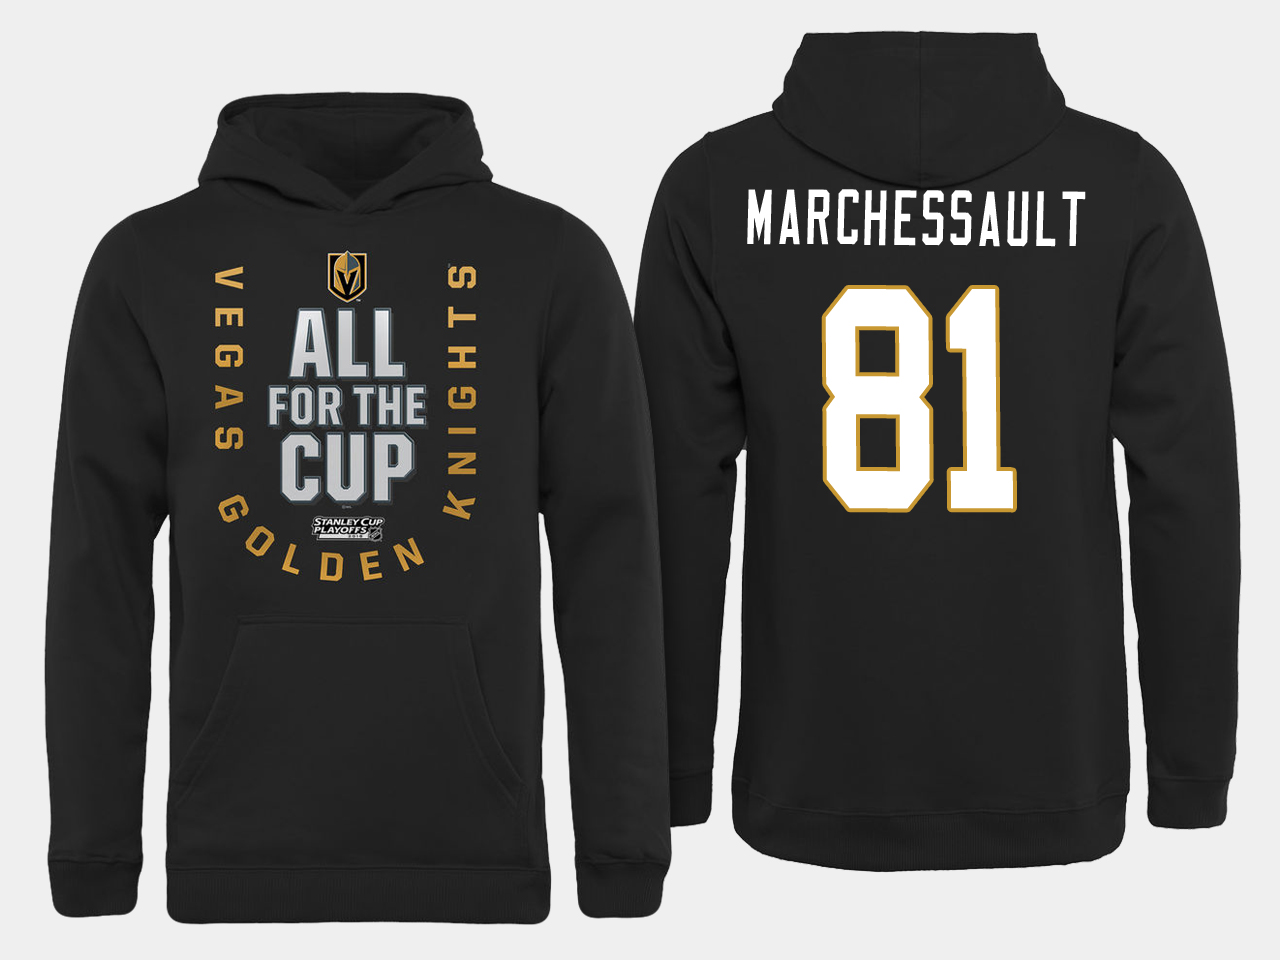 Men NHL Vegas Golden Knights 81 Marchessault All for the Cup hoodie